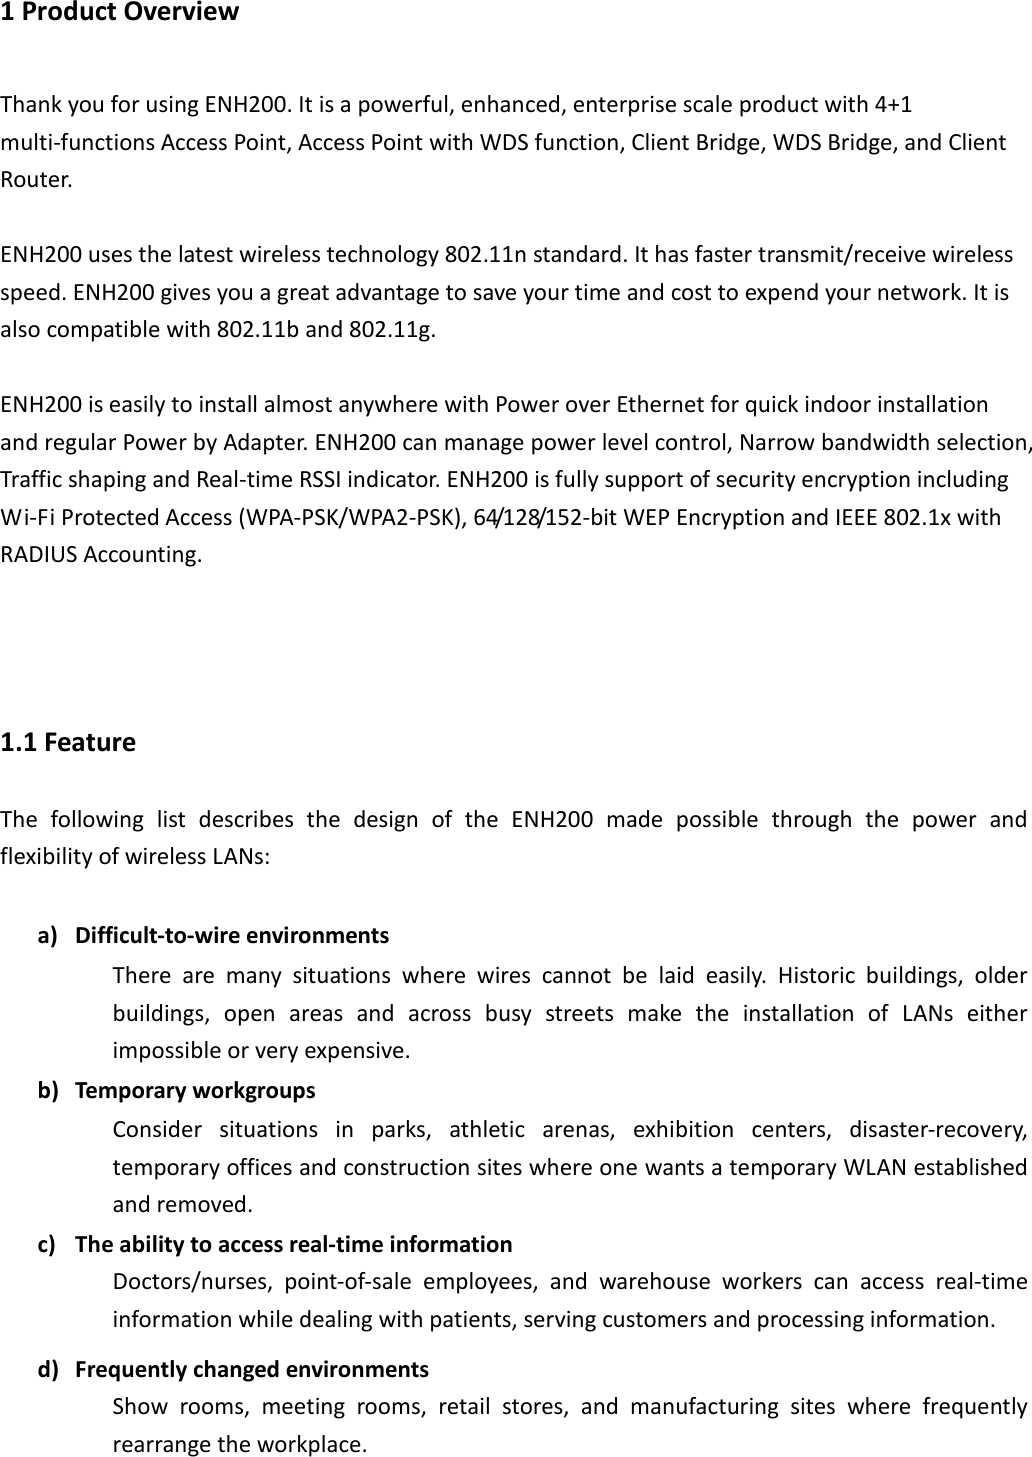 1 Product Overview Thank you for using ENH200. It is a powerful, enhanced, enterprise scale product with 4+1 multi-functions Access Point, Access Point with WDS function, Client Bridge, WDS Bridge, and Client Router.  ENH200 uses the latest wireless technology 802.11n standard. It has faster transmit/receive wireless speed. ENH200 gives you a great advantage to save your time and cost to expend your network. It is also compatible with 802.11b and 802.11g.  ENH200 is easily to install almost anywhere with Power over Ethernet for quick indoor installation and regular Power by Adapter. ENH200 can manage power level control, Narrow bandwidth selection, Traffic shaping and Real-time RSSI indicator. ENH200 is fully support of security encryption including Wi-Fi Protected Access (WPA-PSK/WPA2-PSK), 64/128/152-bit WEP Encryption and IEEE 802.1x with RADIUS Accounting.    1.1 Feature The  following  list  describes  the  design  of  the  ENH200  made  possible  through  the  power  and flexibility of wireless LANs:  a) Difficult-to-wire environments There  are  many  situations  where  wires  cannot  be  laid  easily.  Historic  buildings,  older buildings,  open  areas  and  across  busy  streets  make  the  installation  of  LANs  either impossible or very expensive. b) Temporary workgroups Consider  situations  in  parks,  athletic  arenas,  exhibition  centers,  disaster-recovery, temporary offices and construction sites where one wants a temporary WLAN established and removed. c) The ability to access real-time information Doctors/nurses,  point-of-sale  employees,  and  warehouse  workers  can  access  real-time information while dealing with patients, serving customers and processing information. d) Frequently changed environments Show  rooms,  meeting  rooms,  retail  stores,  and  manufacturing  sites  where  frequently rearrange the workplace. 